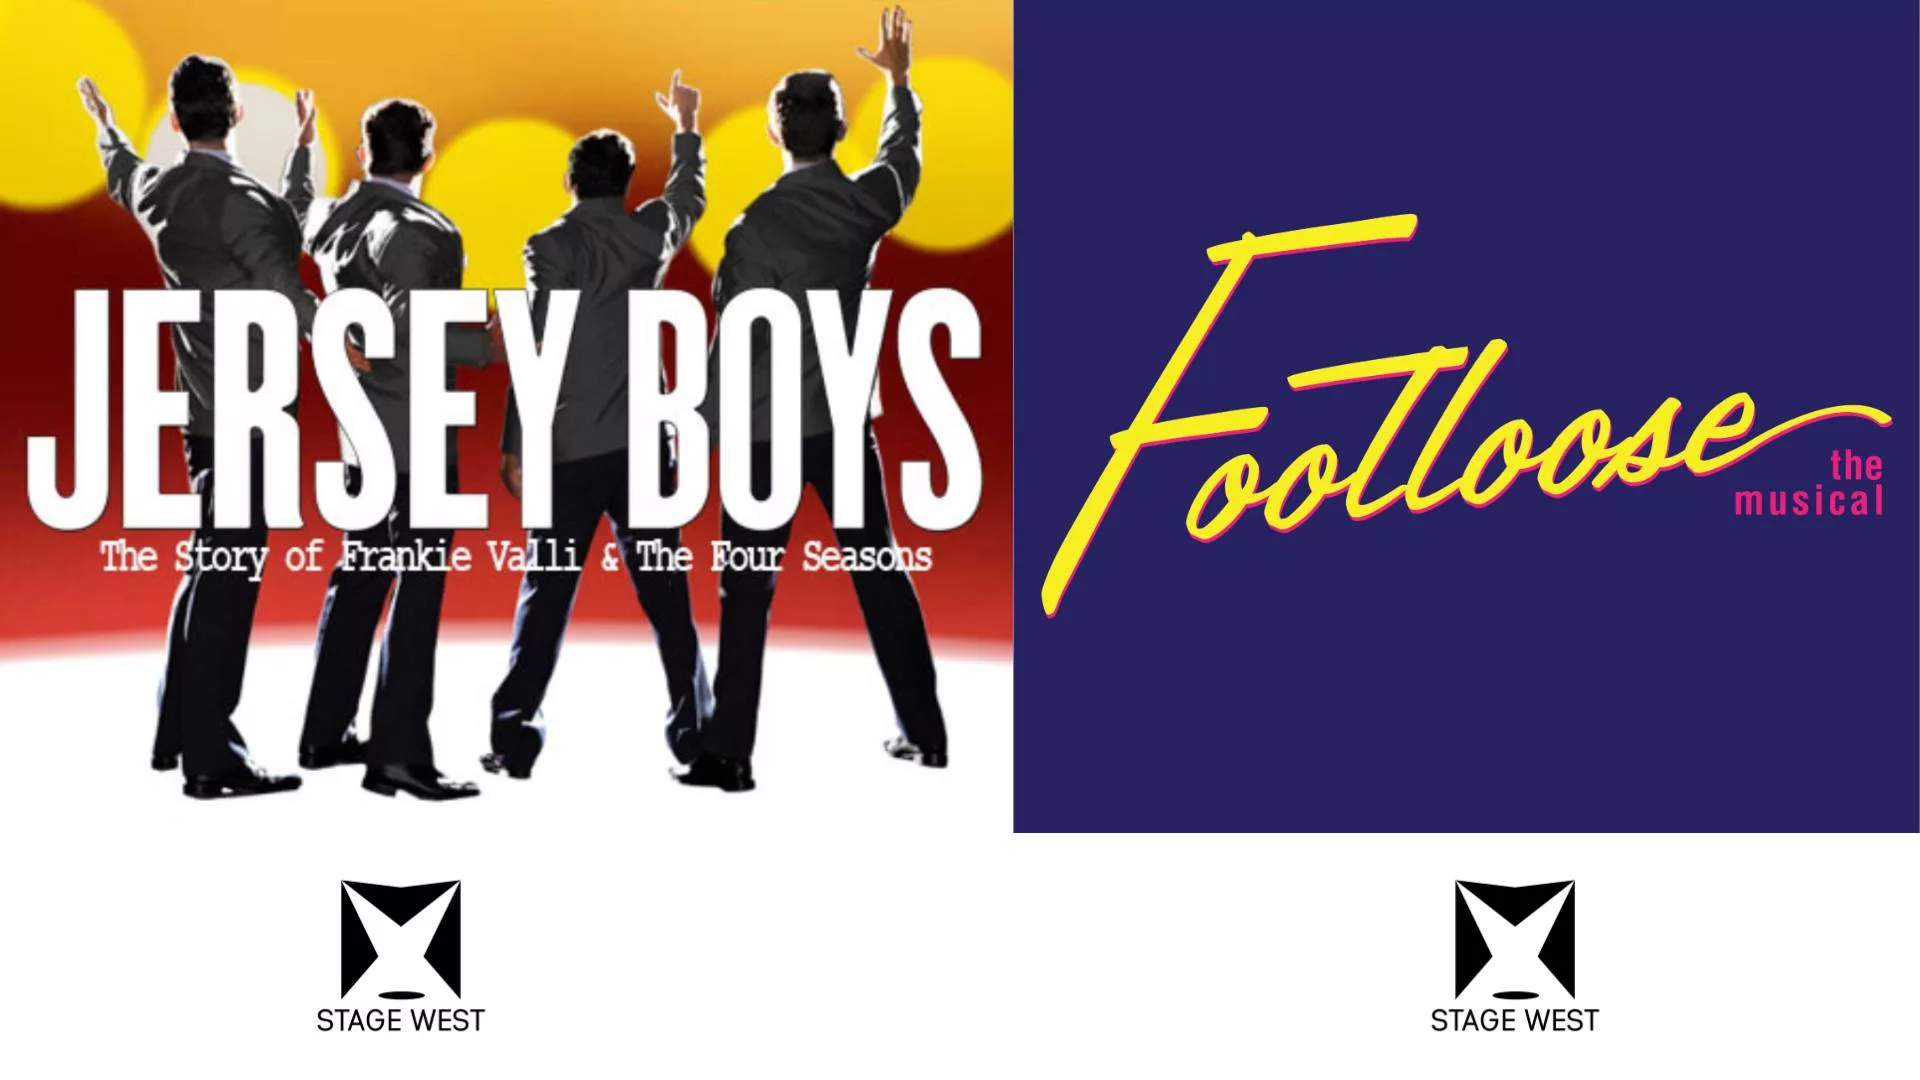 Tickets On Sale for Stage West’s Jersey Boys and Footloose Performances